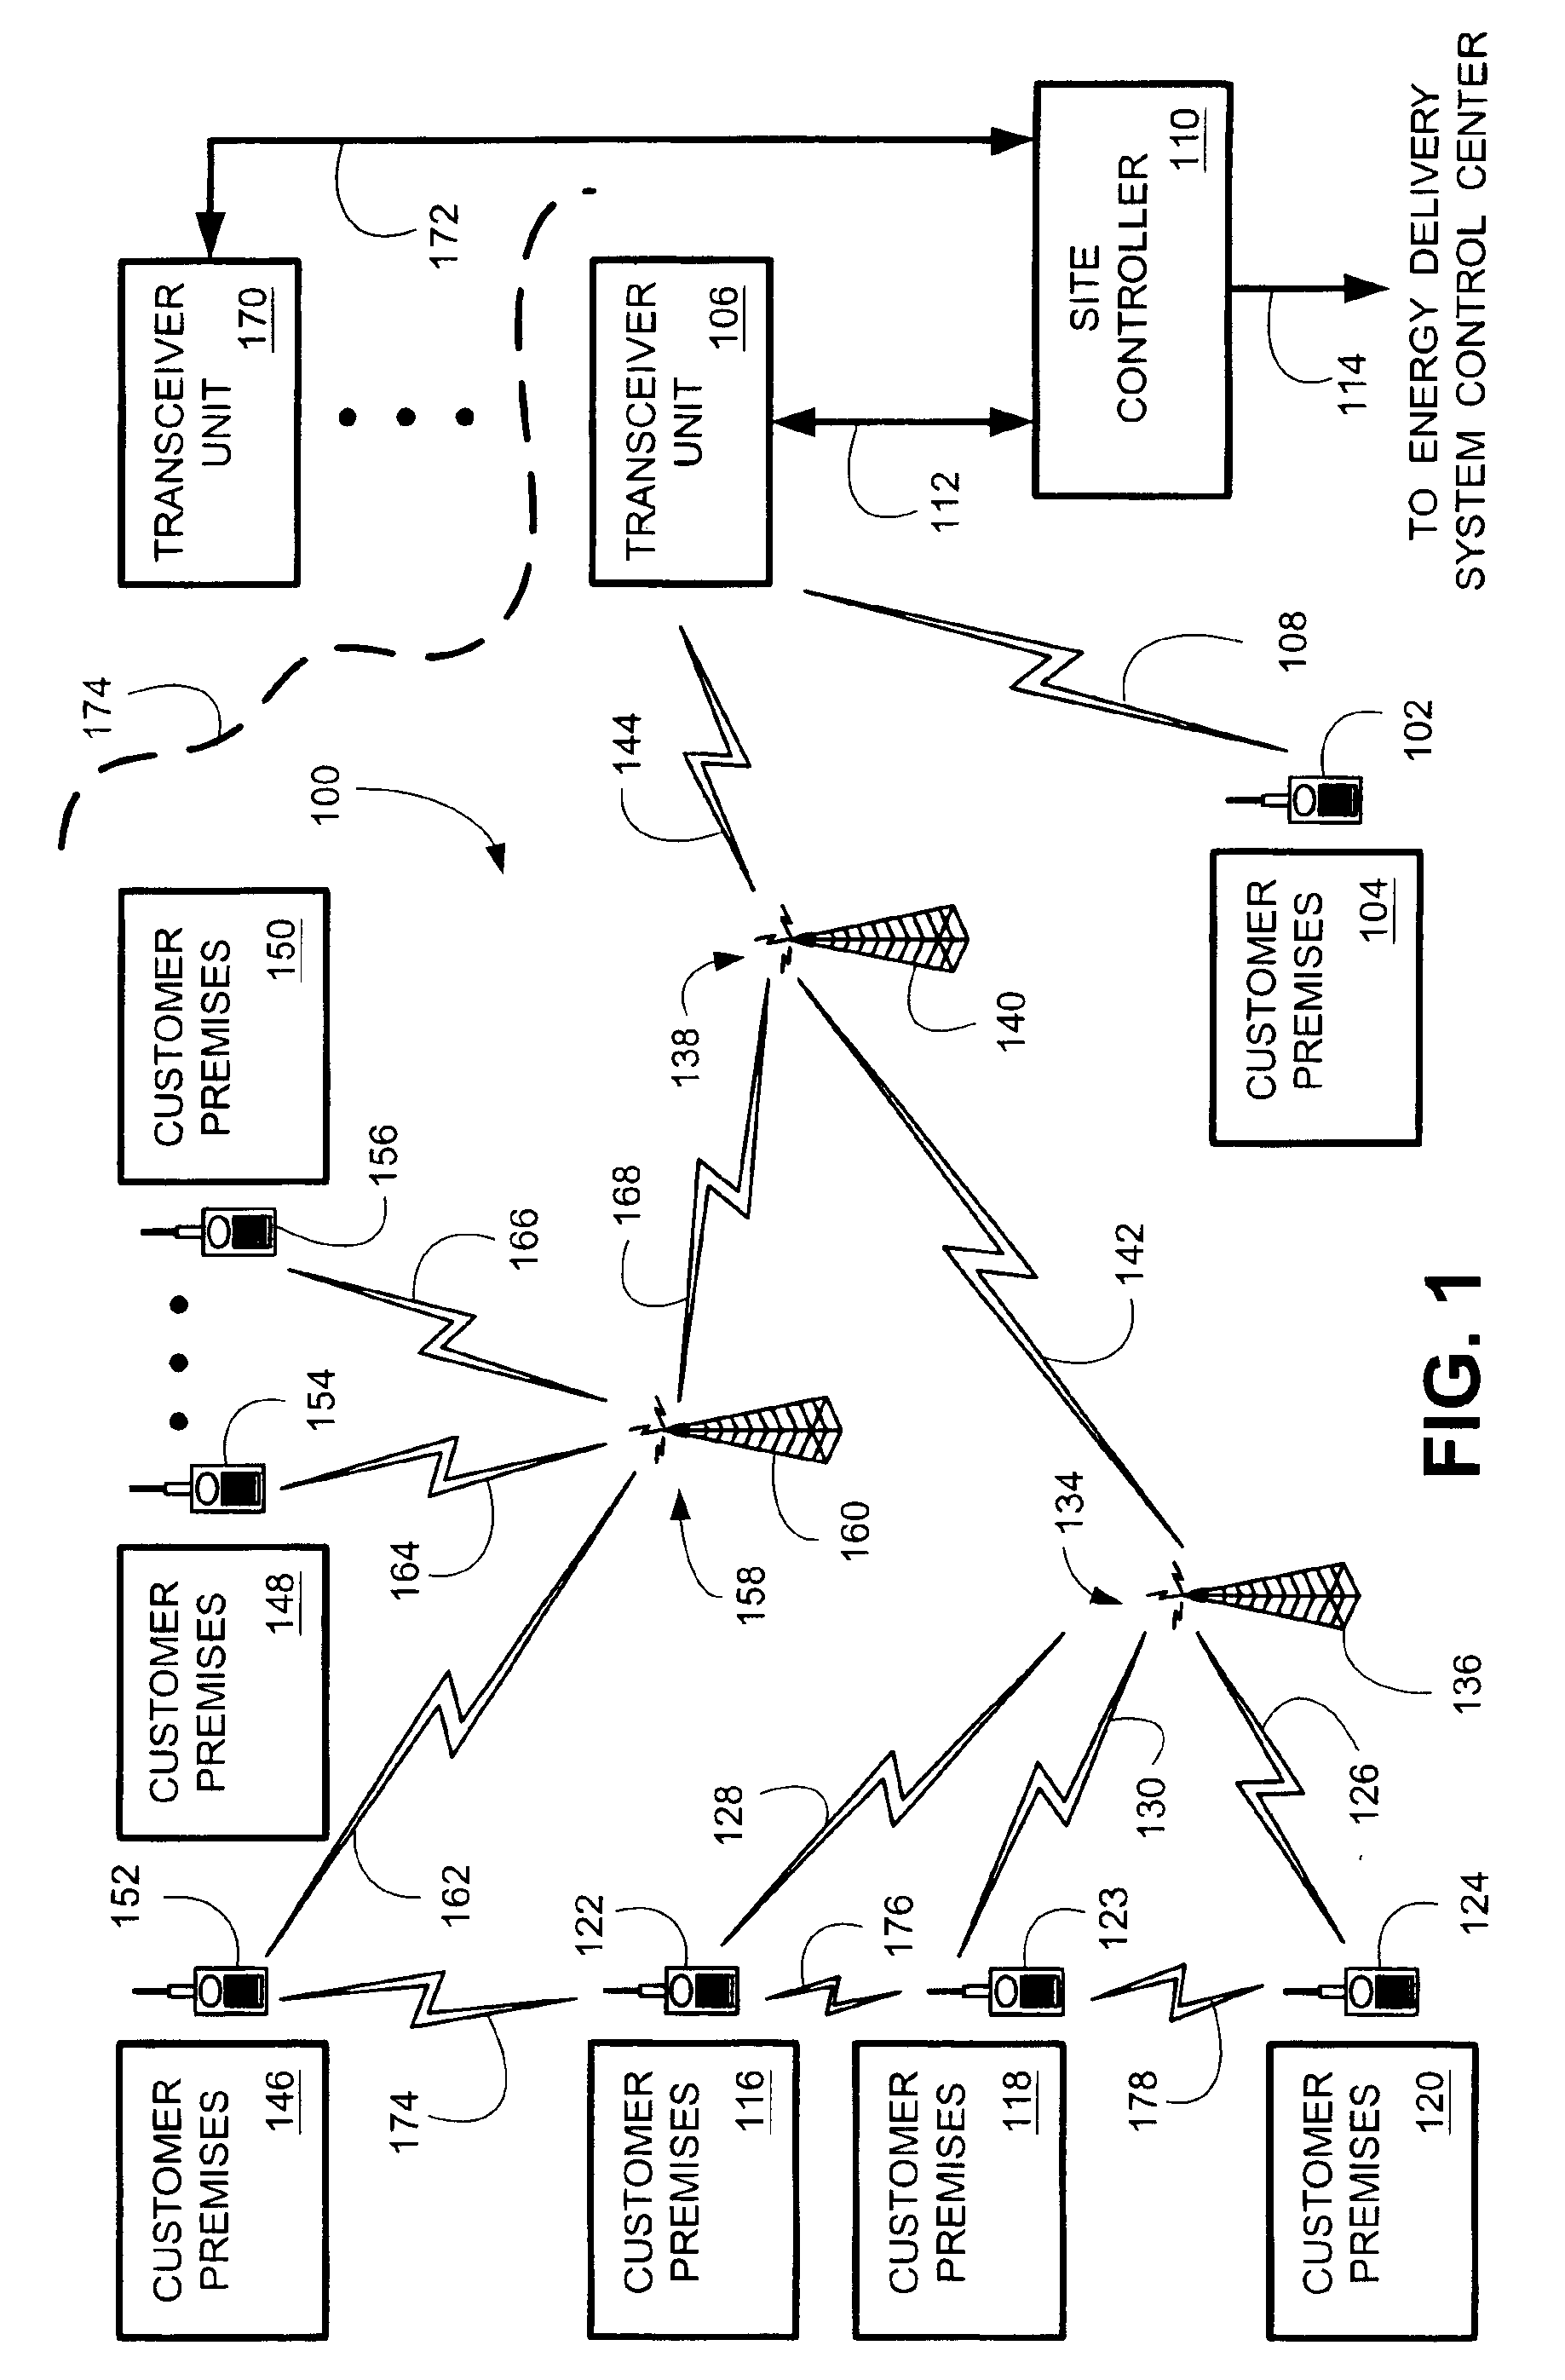 System and method for controlling power demand over an integrated wireless network